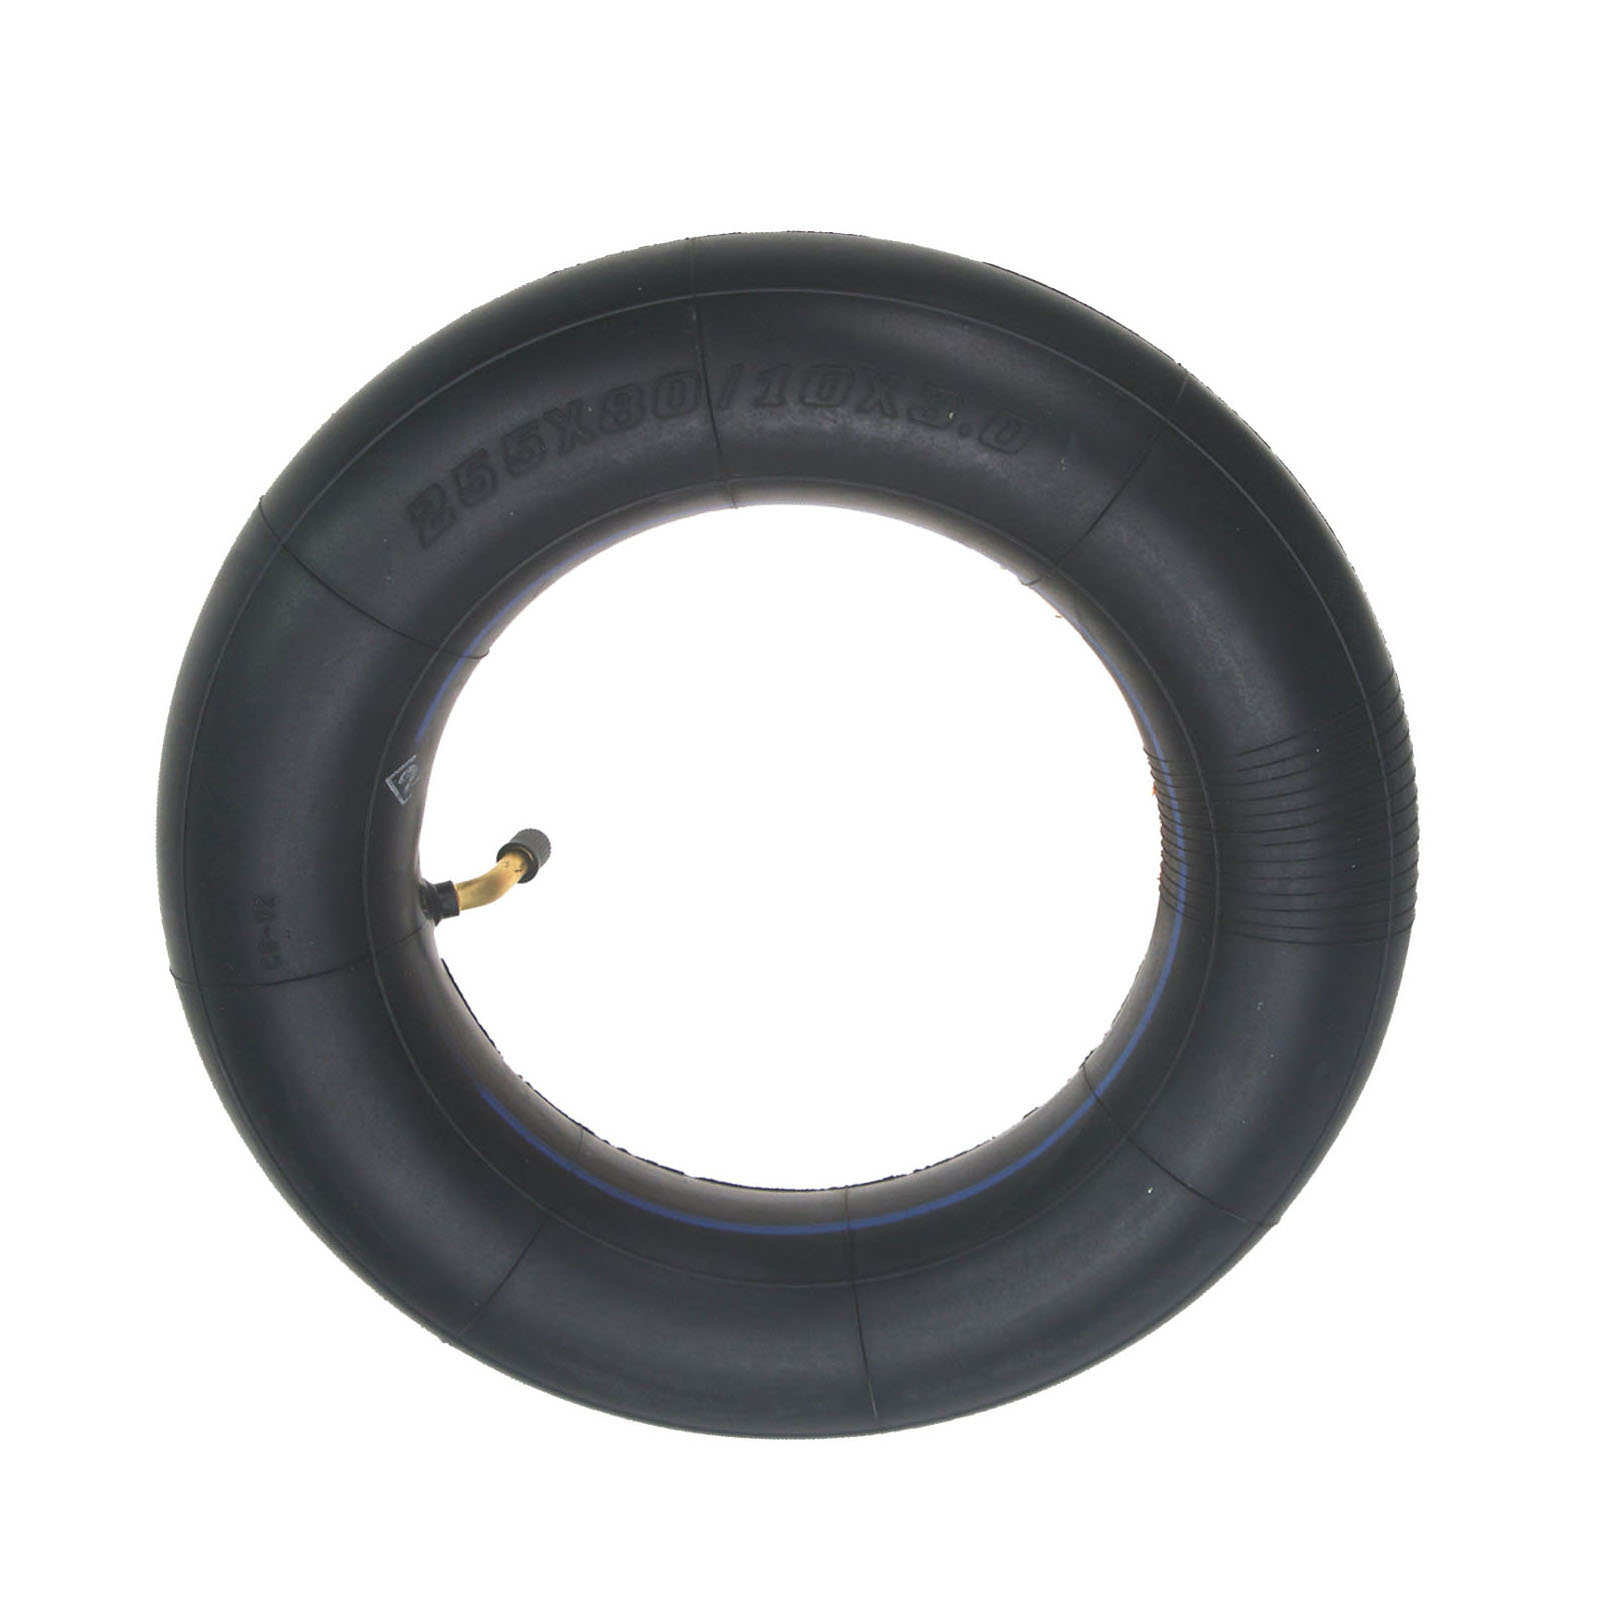 Thickened 10 * 3 Inner Tube Electric Scooter Tire 255 * 80 Inner Tube Suitable for 90/65-6.5 and 80/65-6.5 Tires 240mm Diameter Tire Electric Skateboard Inner Tube - image 2 of 5